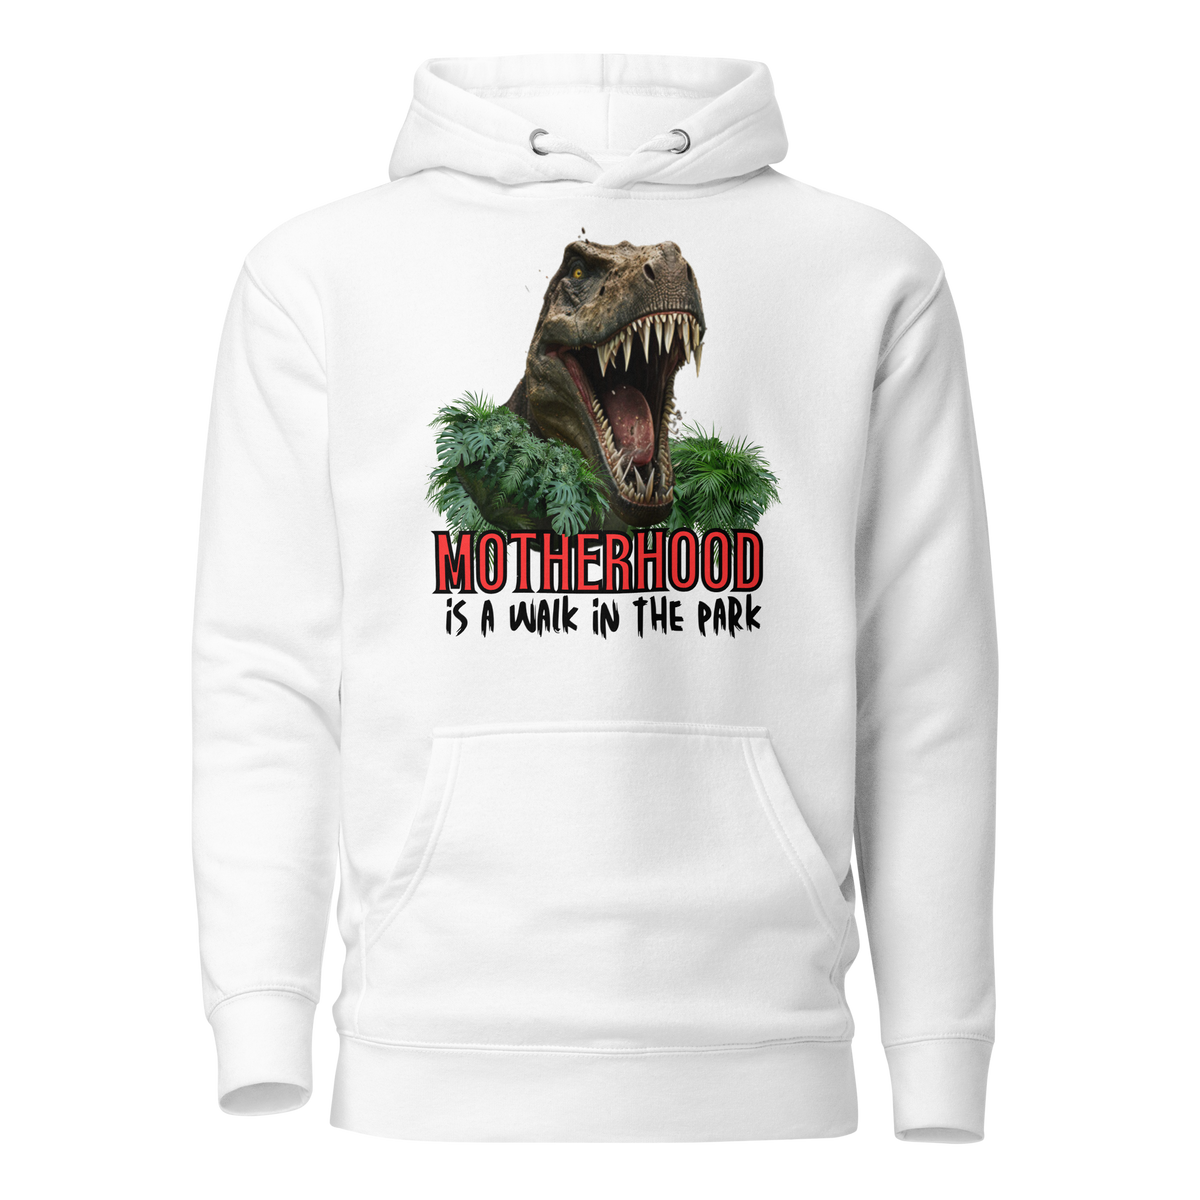 hoodie, dinosaur, motherhood, parenting, family, mom life, cozy wear, humorous design, mother's day, mom gift, soft fabric, light-hearted phrase, casual style, warmth, versatile, comfort, strength, adventure, mom pride, laughter, fashion, quality, durability, motherhood its a walk in the park tee